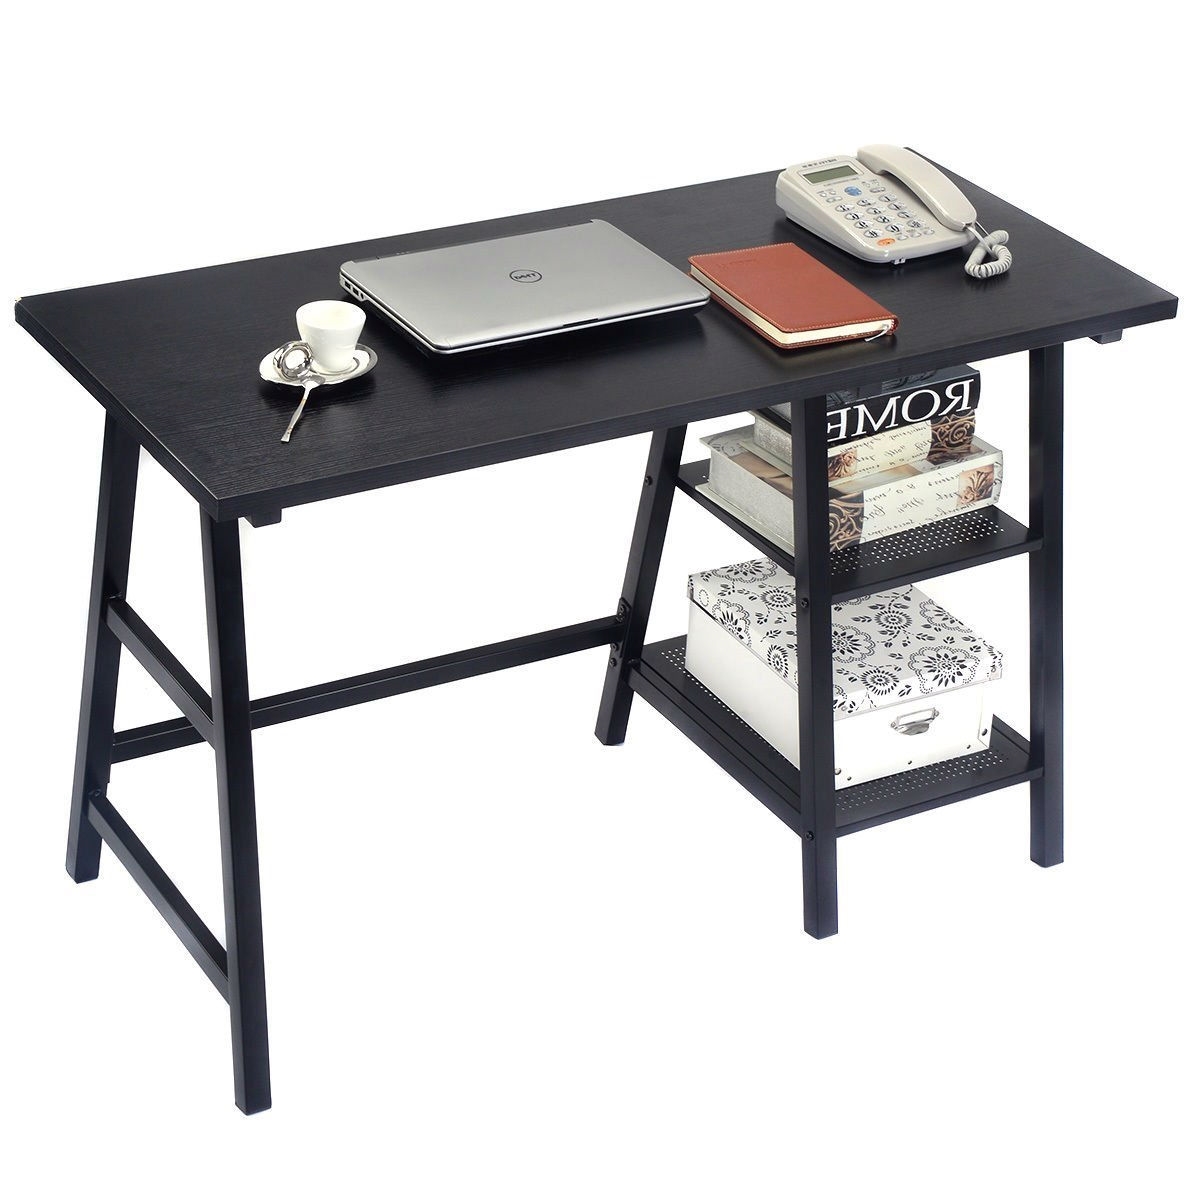 Multipurpose 4 Foot Center Folding Table With Carry Handle Dream